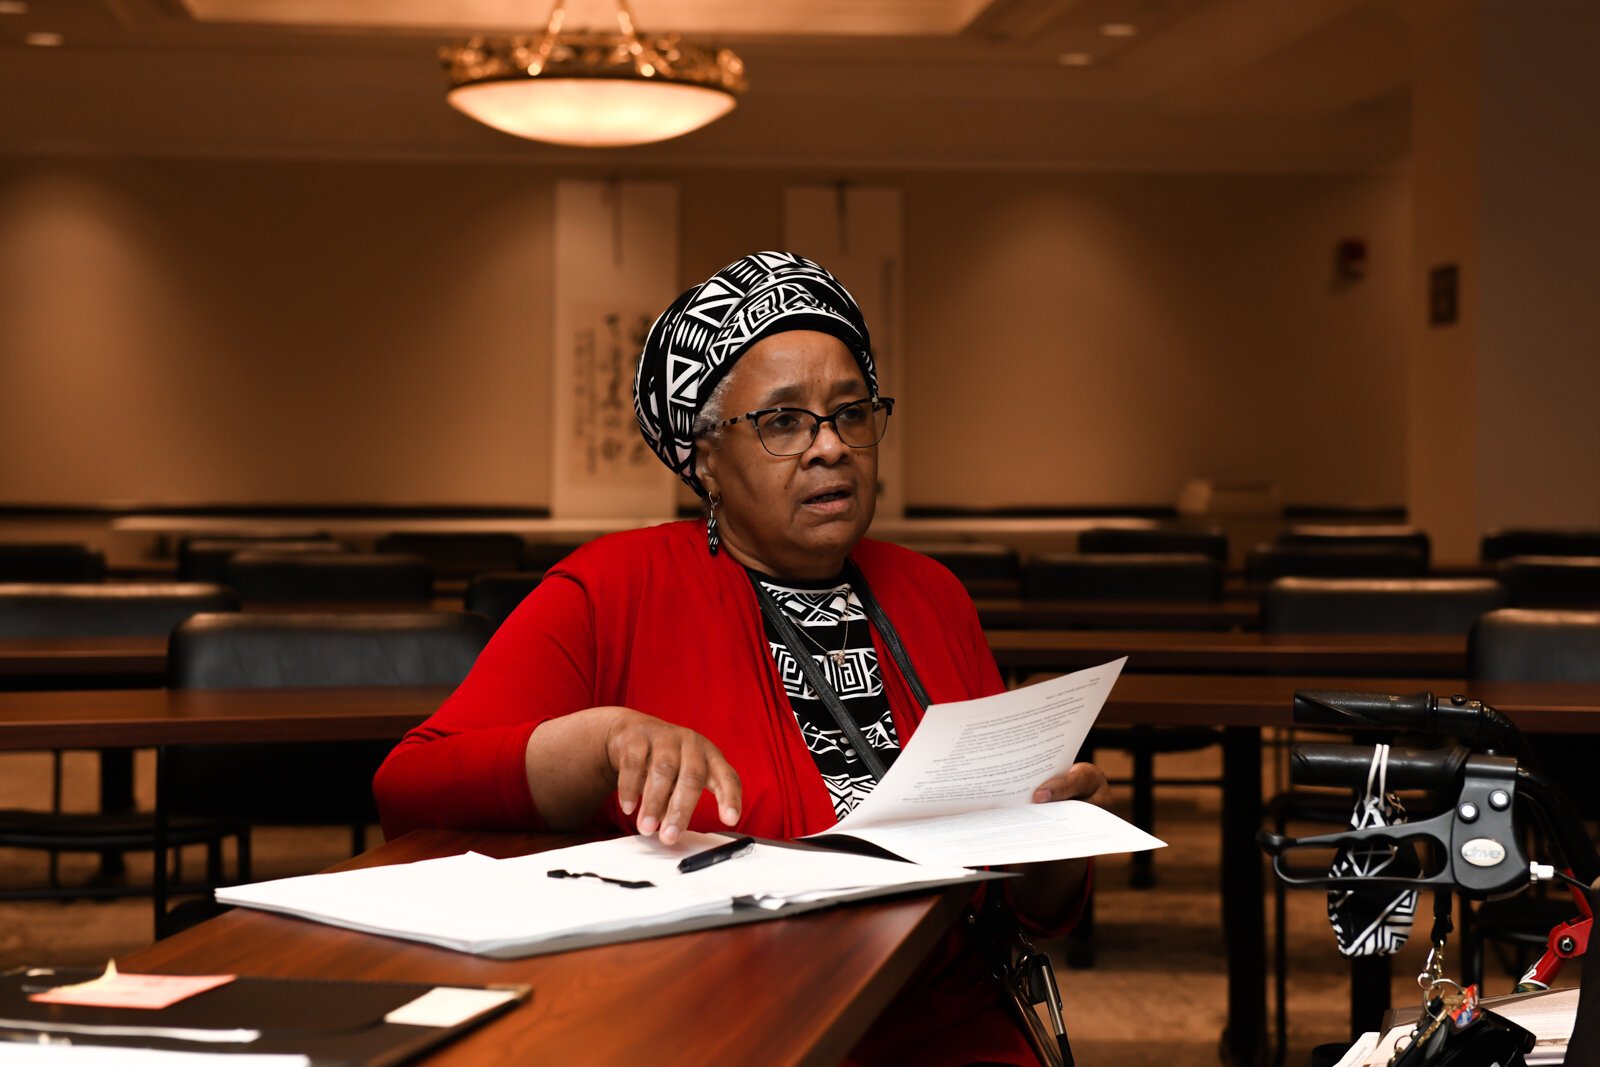 Denise Porter speaks during a council meeting with members of the Mayor's Age-Friendly Council at Citizen's Square,